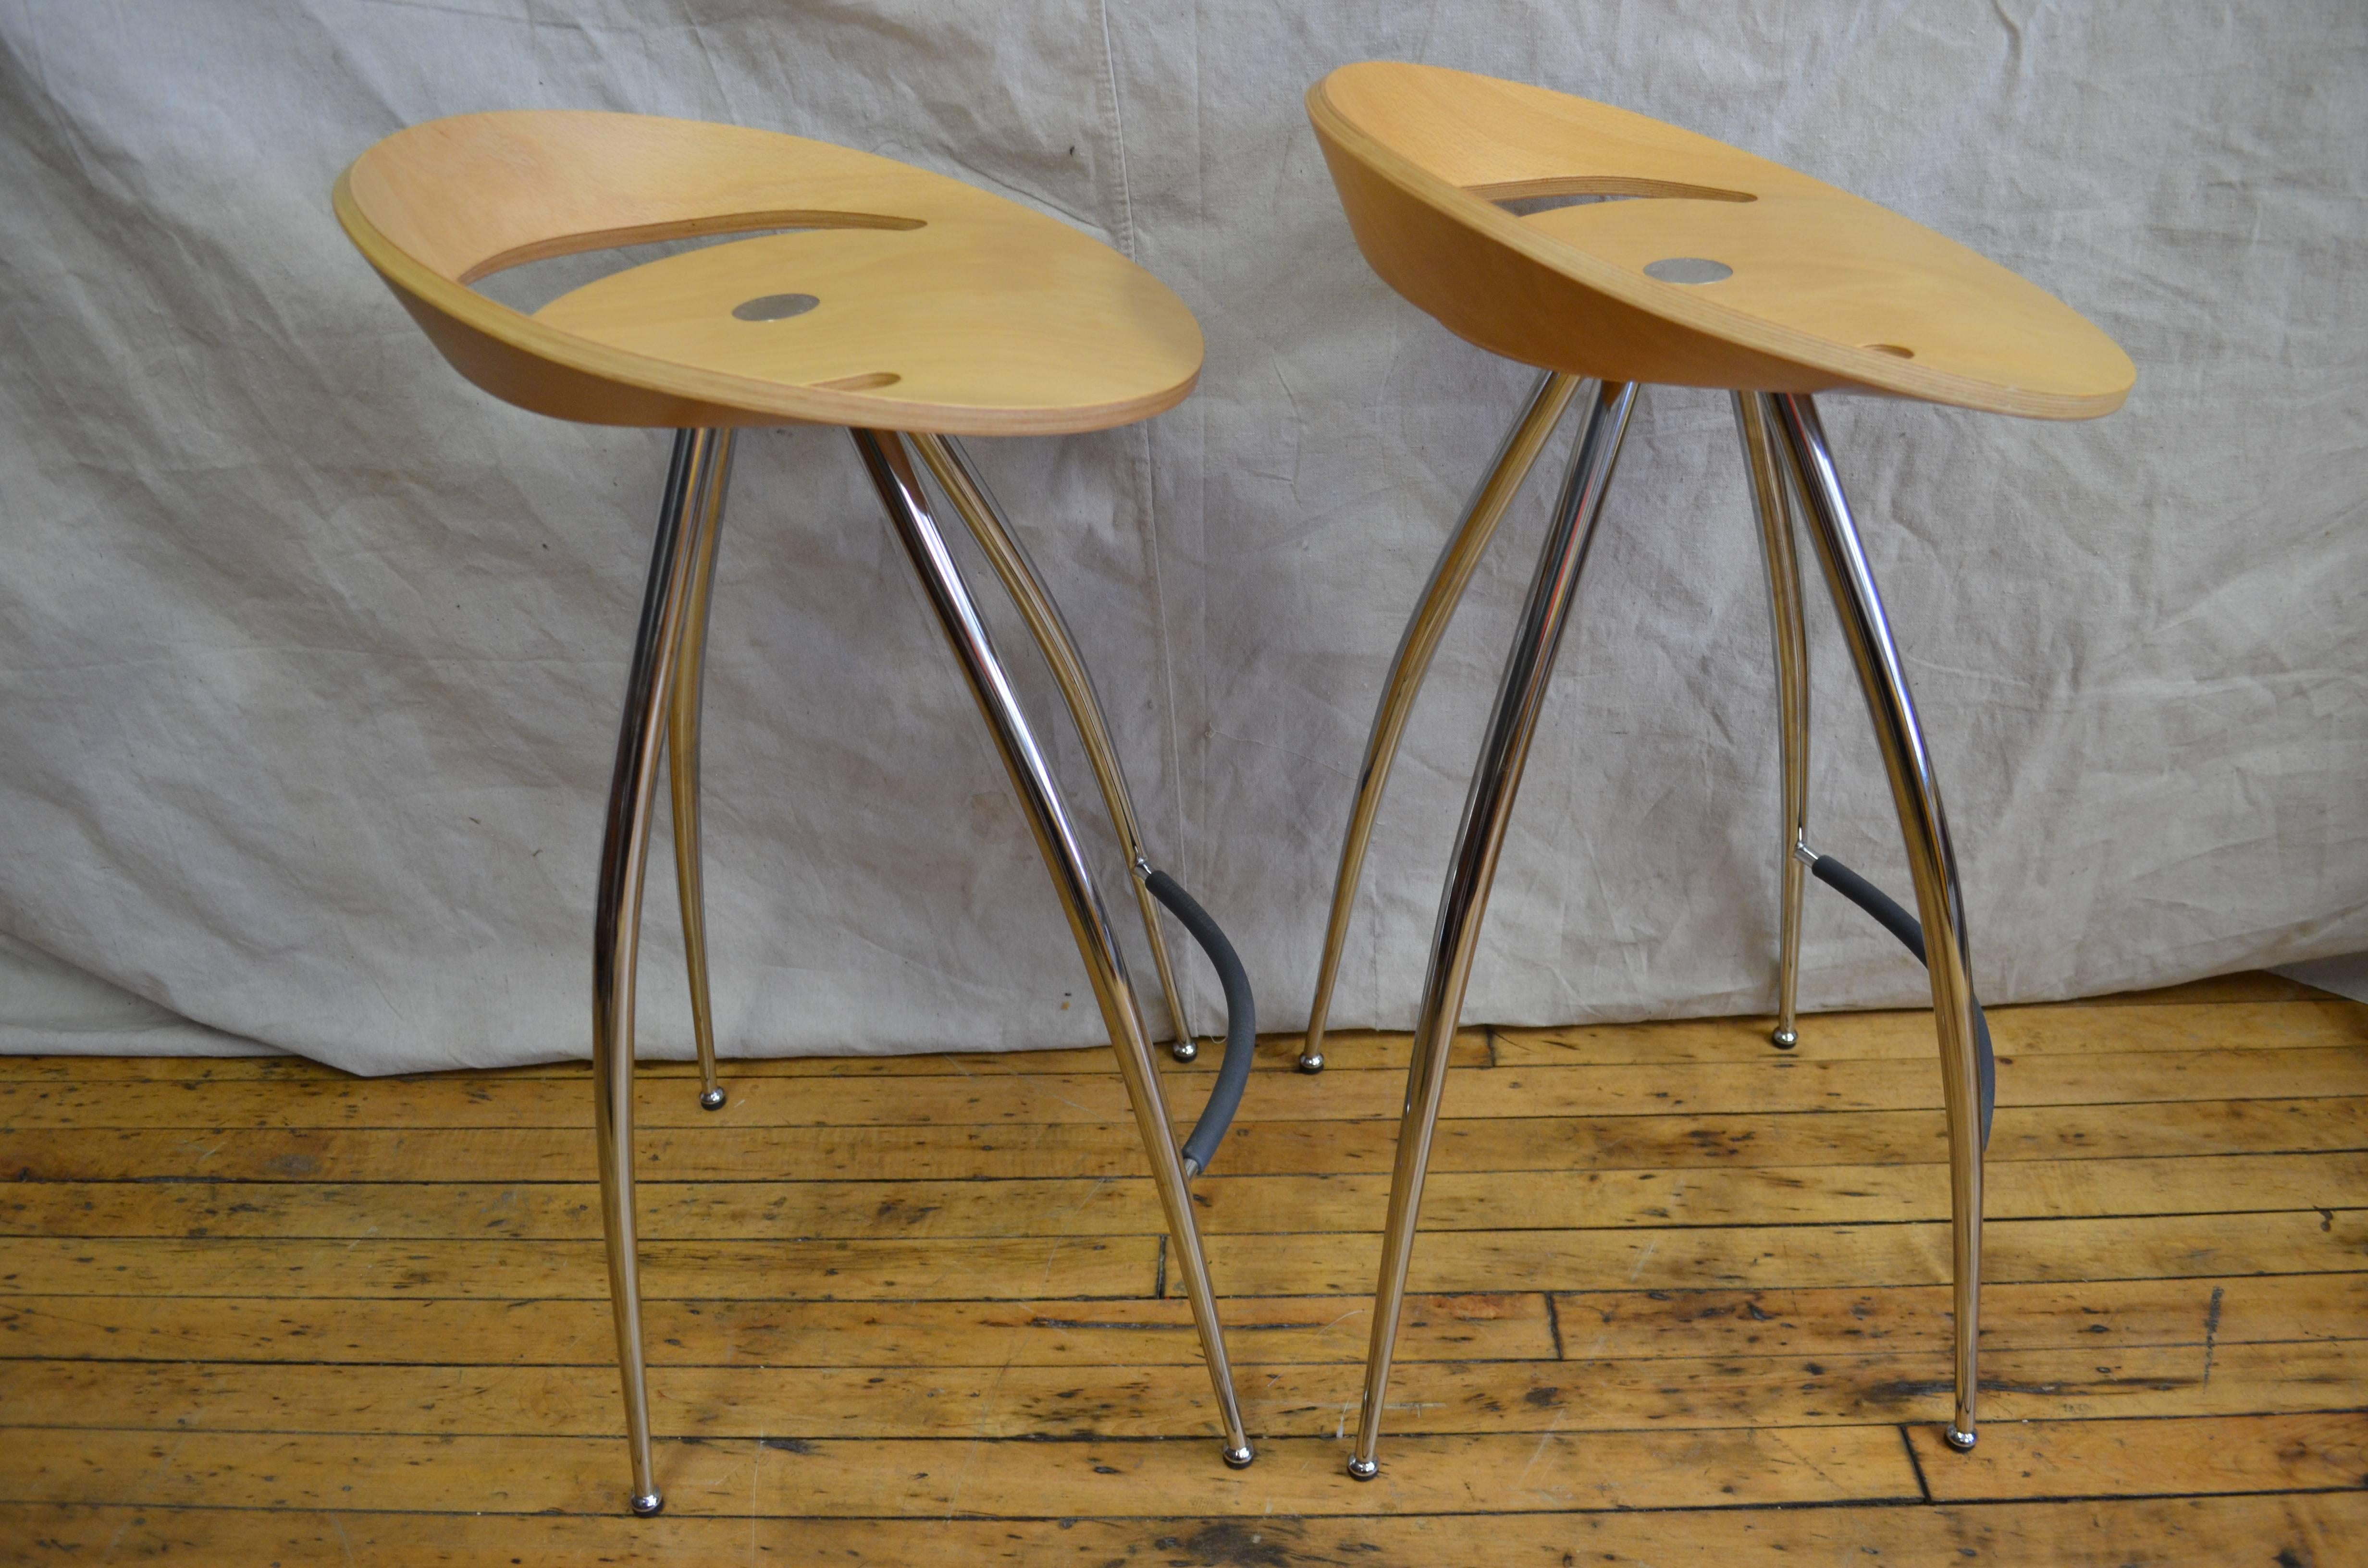 Pair of Lyra stools by Magus design of Italy, distributed through Herman Miller. Medium size with chrome base, beech seat, new feet. Designed by the Milan firm design group Italia 1994, the Lyra stool owes a lot to the way Charles Eames used